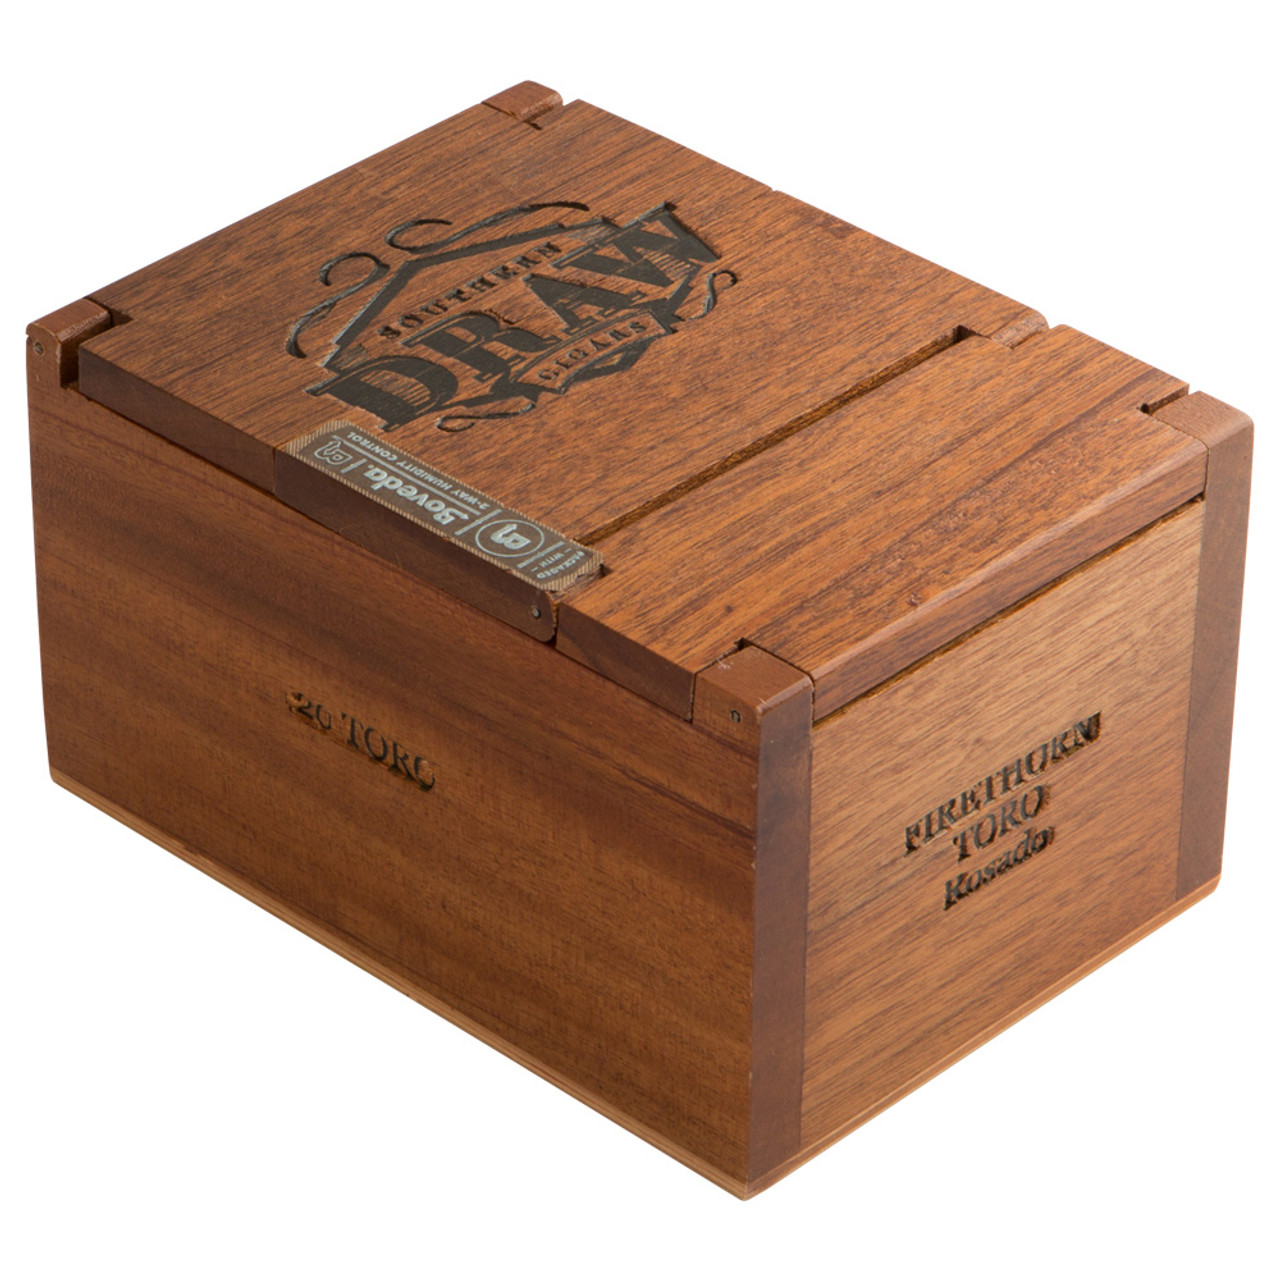 Southern Draw Firethorn Perfecto Cigars - 6 x 56 (Box of 20)